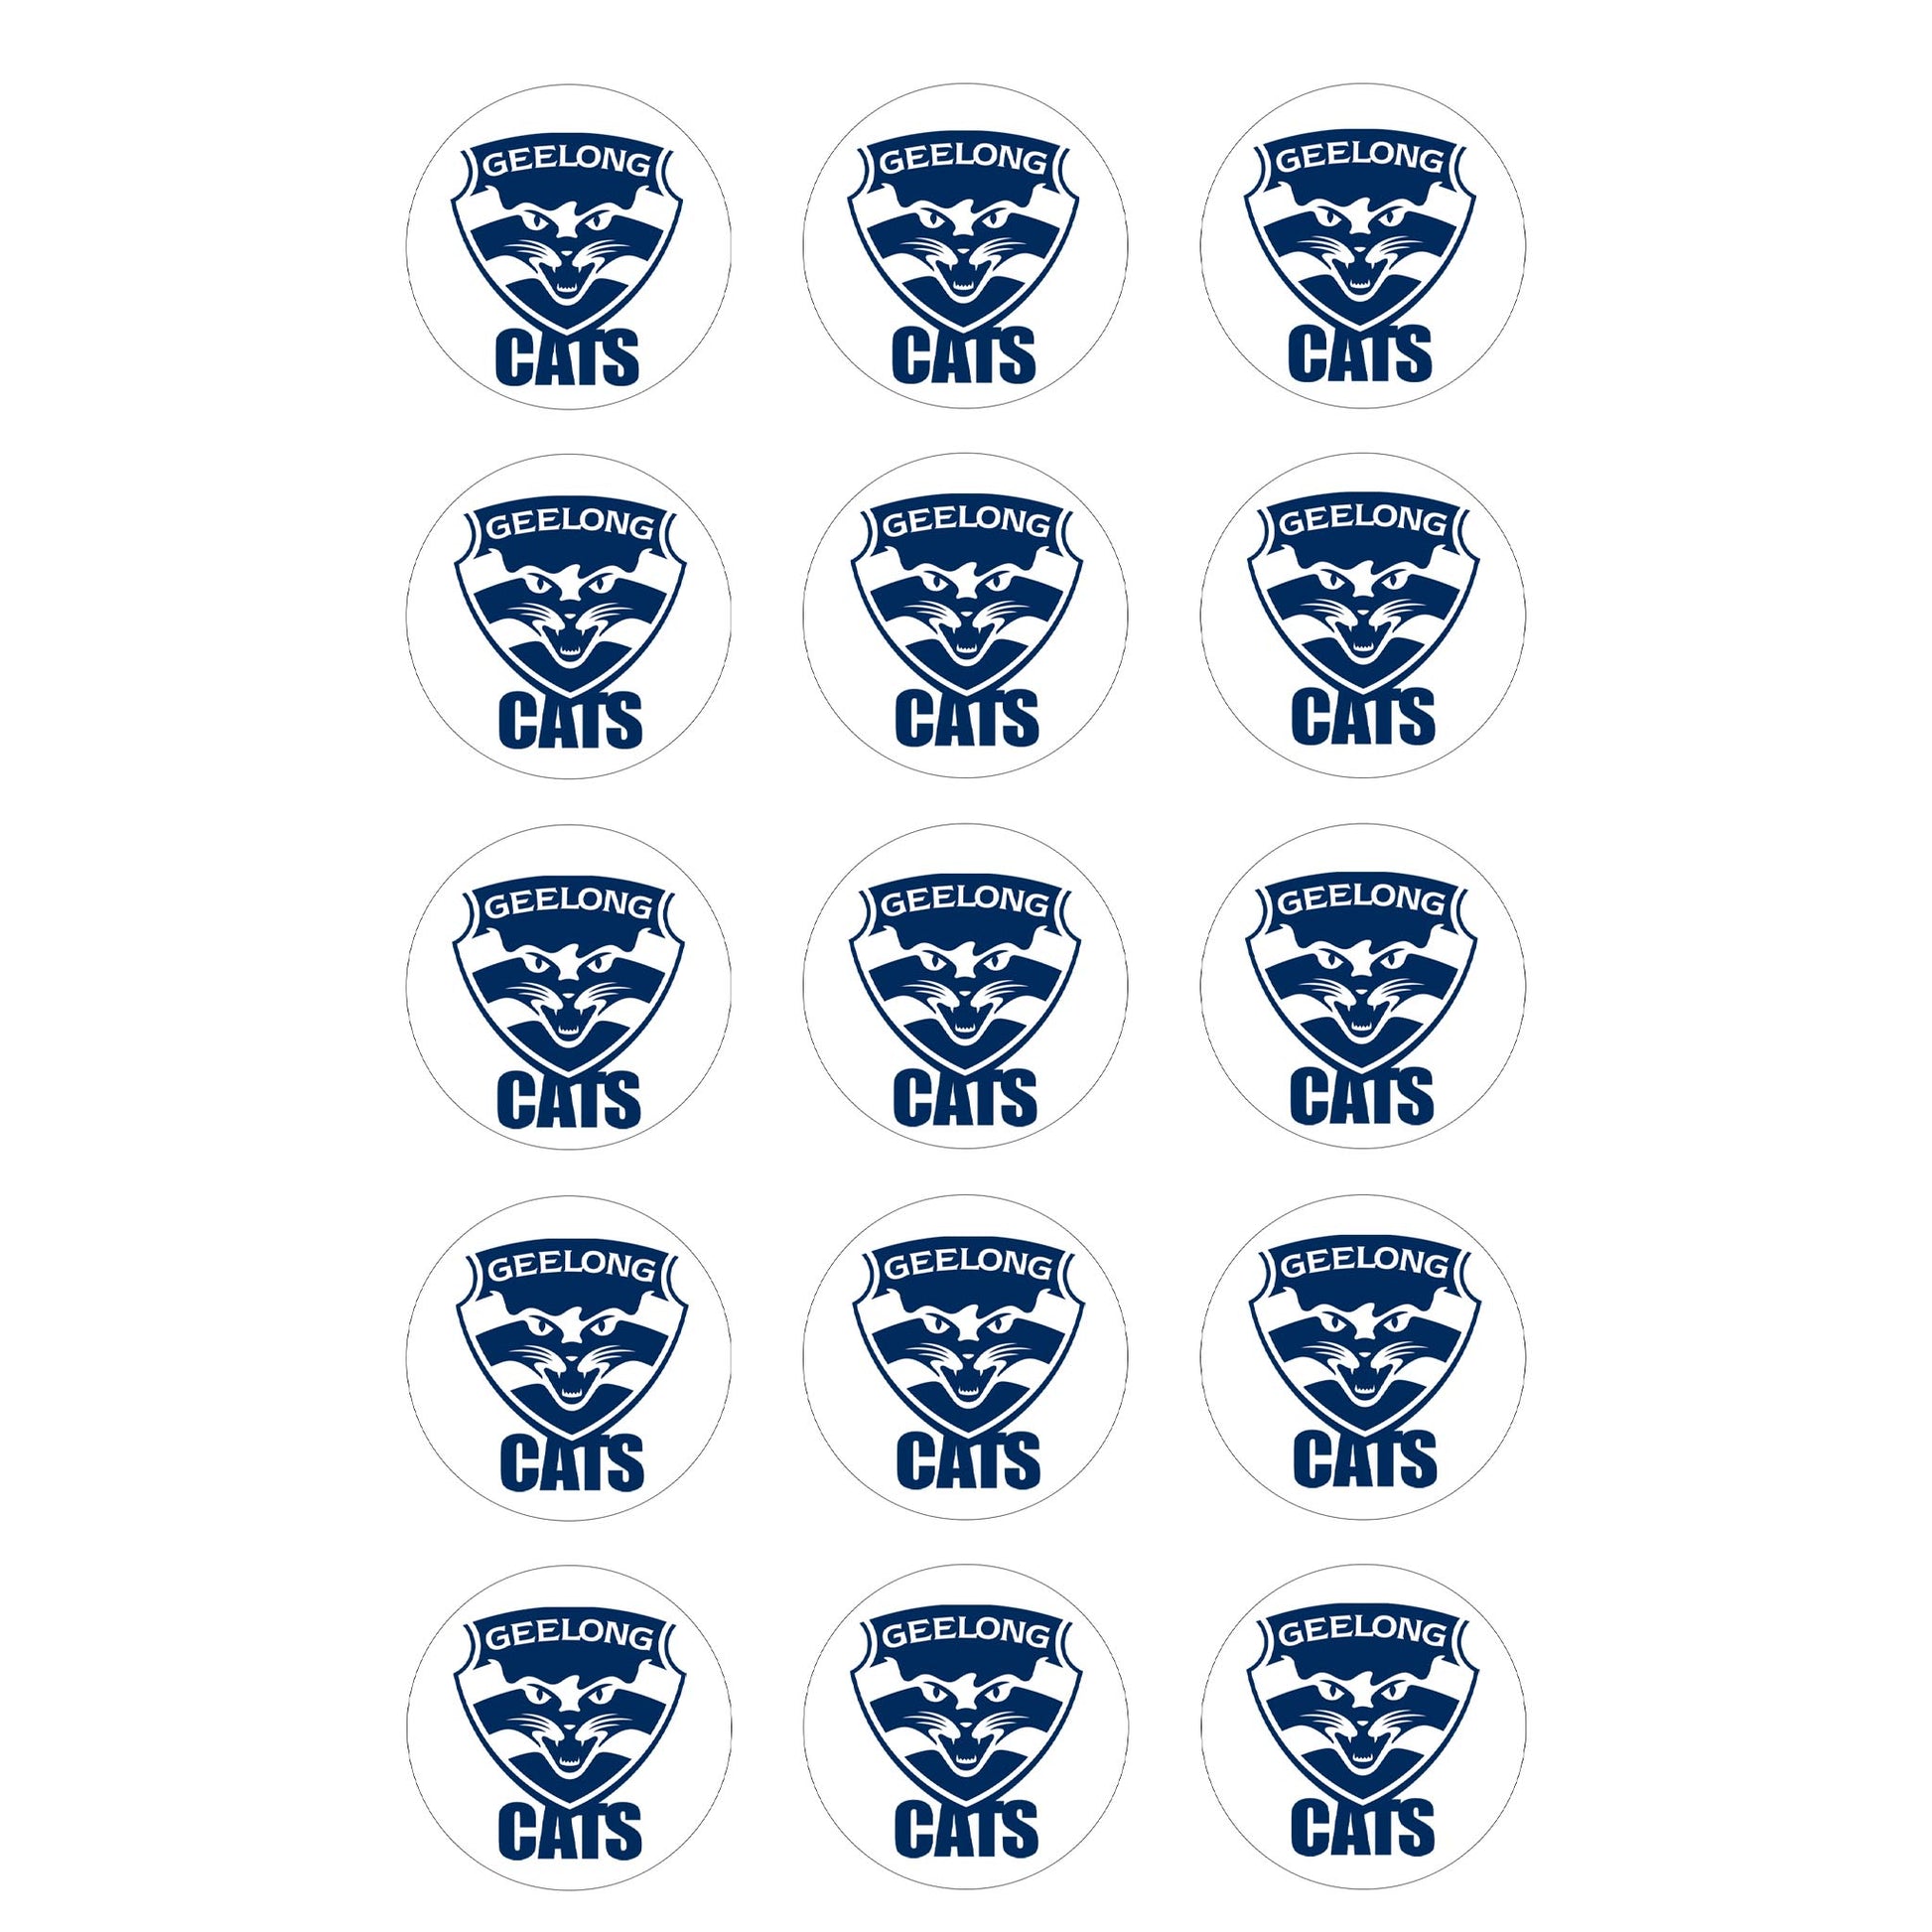 Geelong Cats Football Club - Edible Icing Images. Cupcake and cake prints